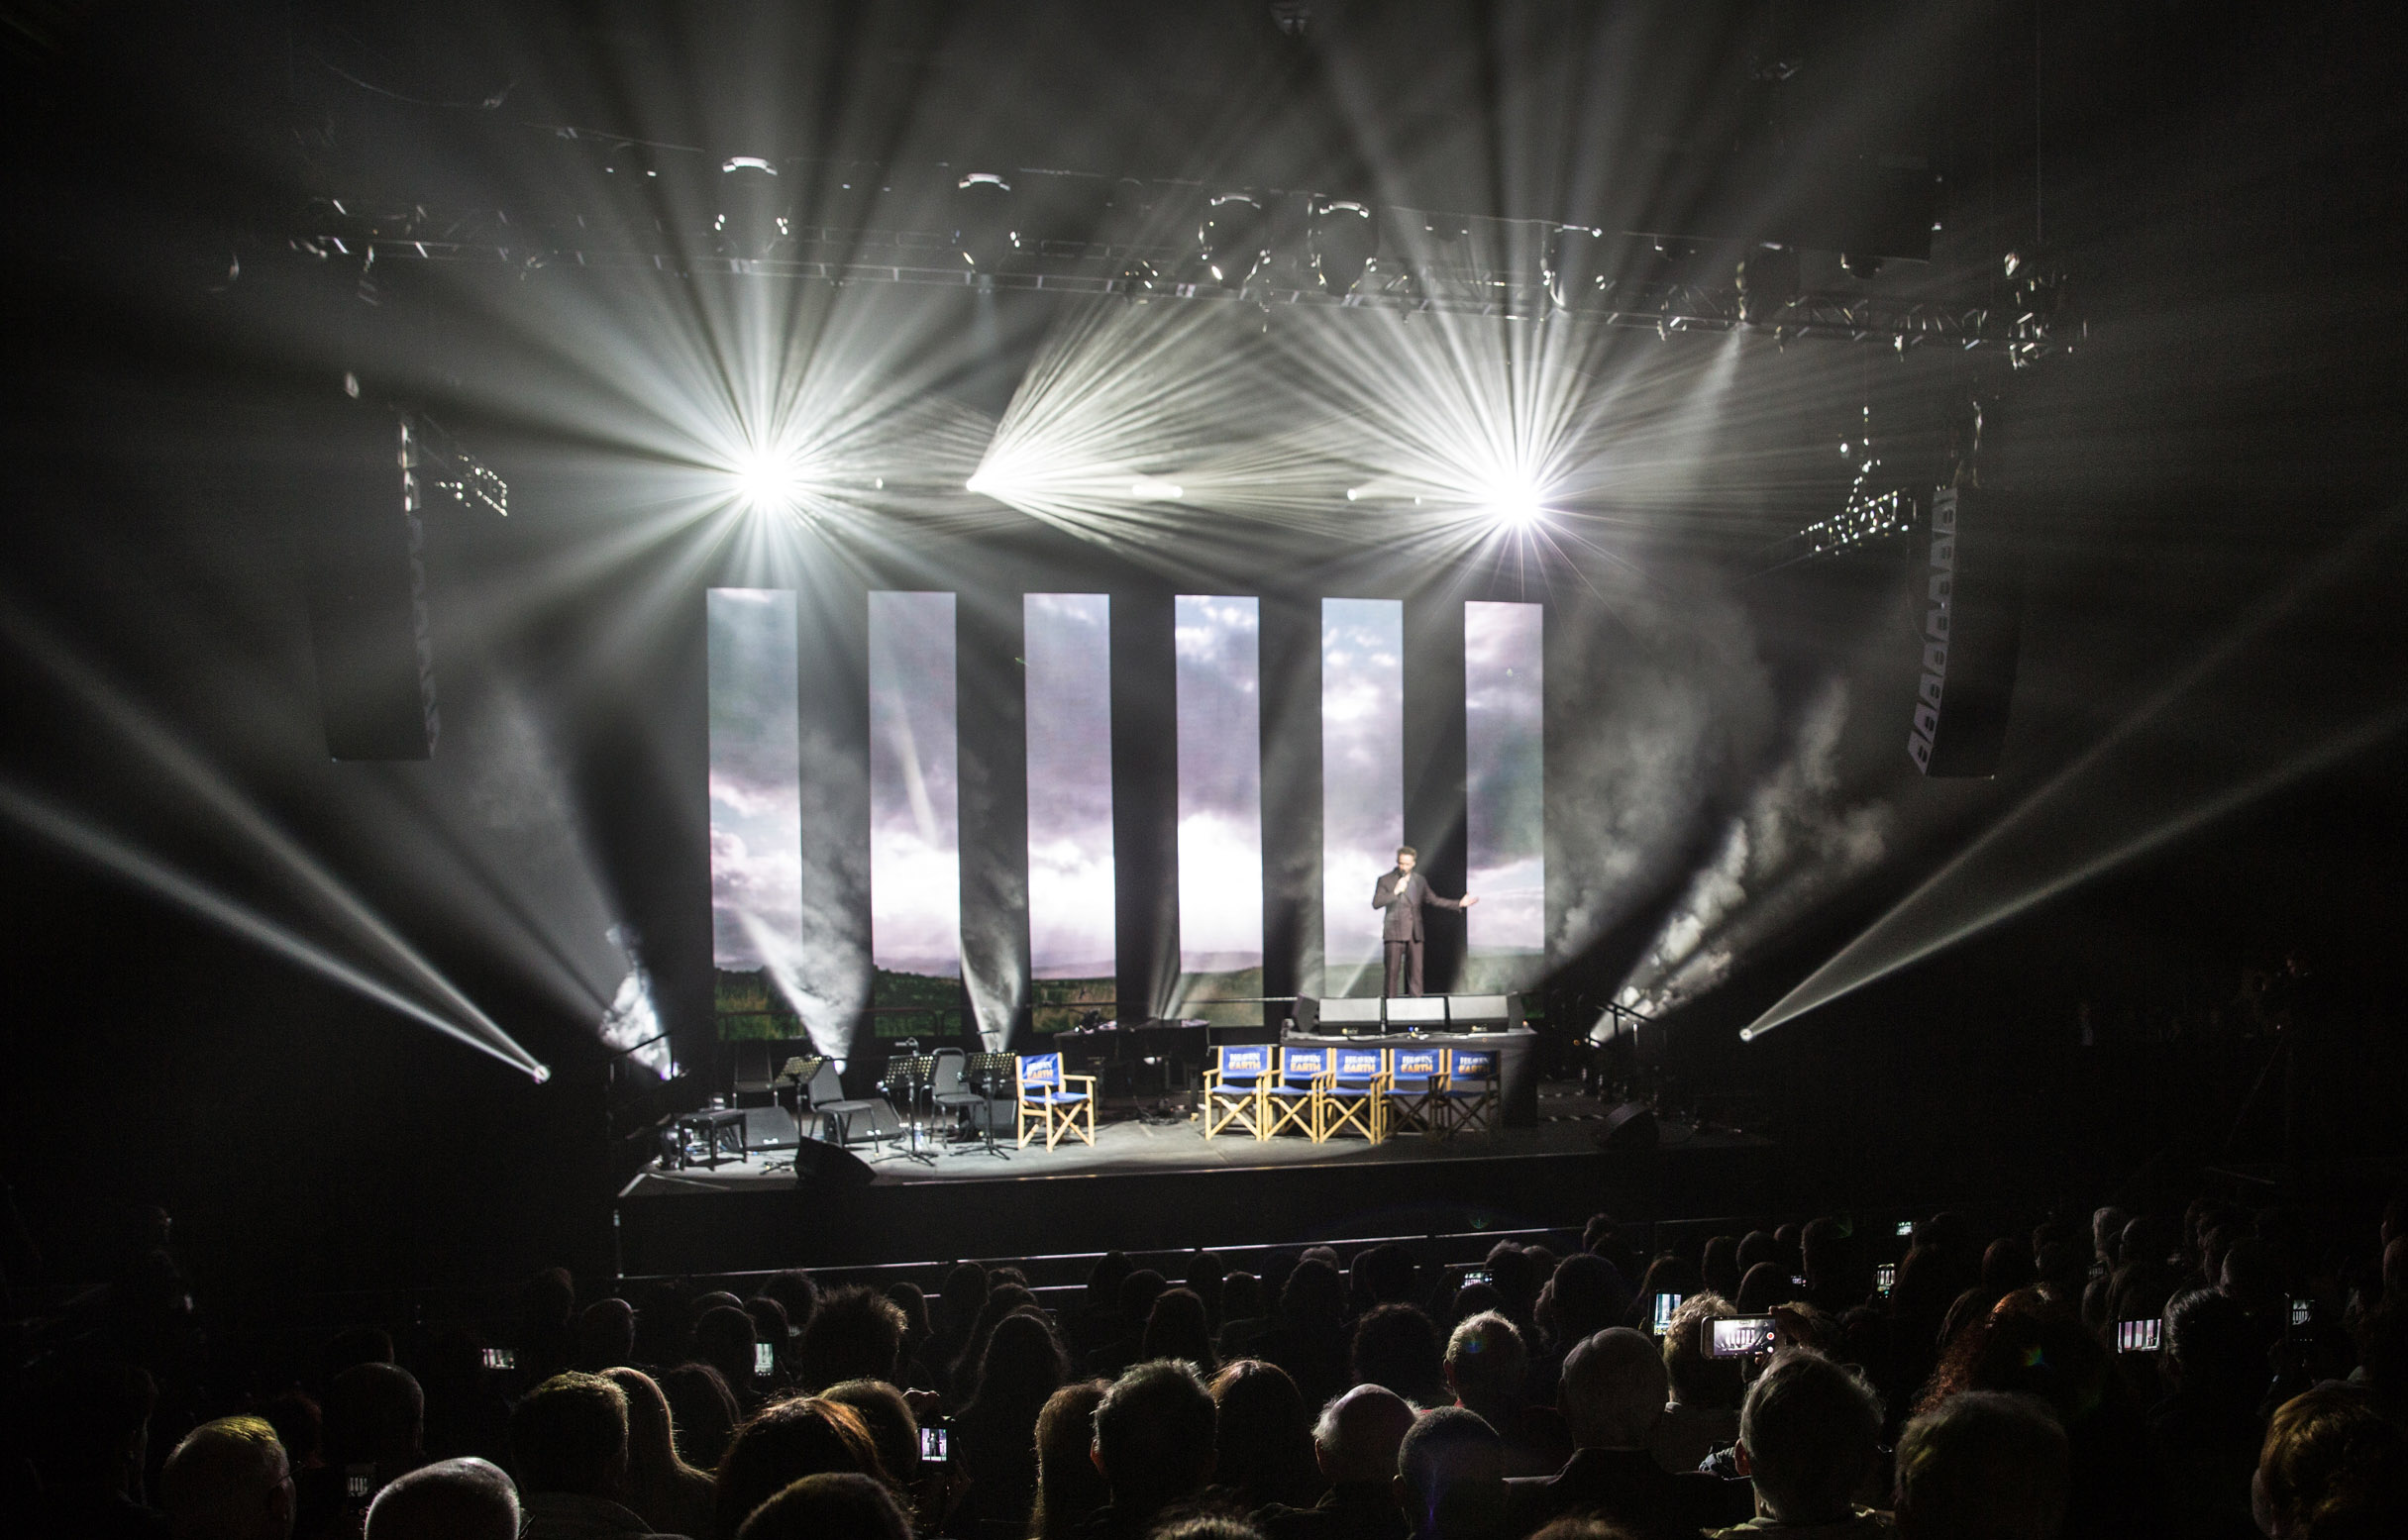 Avolites video and light integration system is ‘Heaven on Earth’ for new arena spectacular  